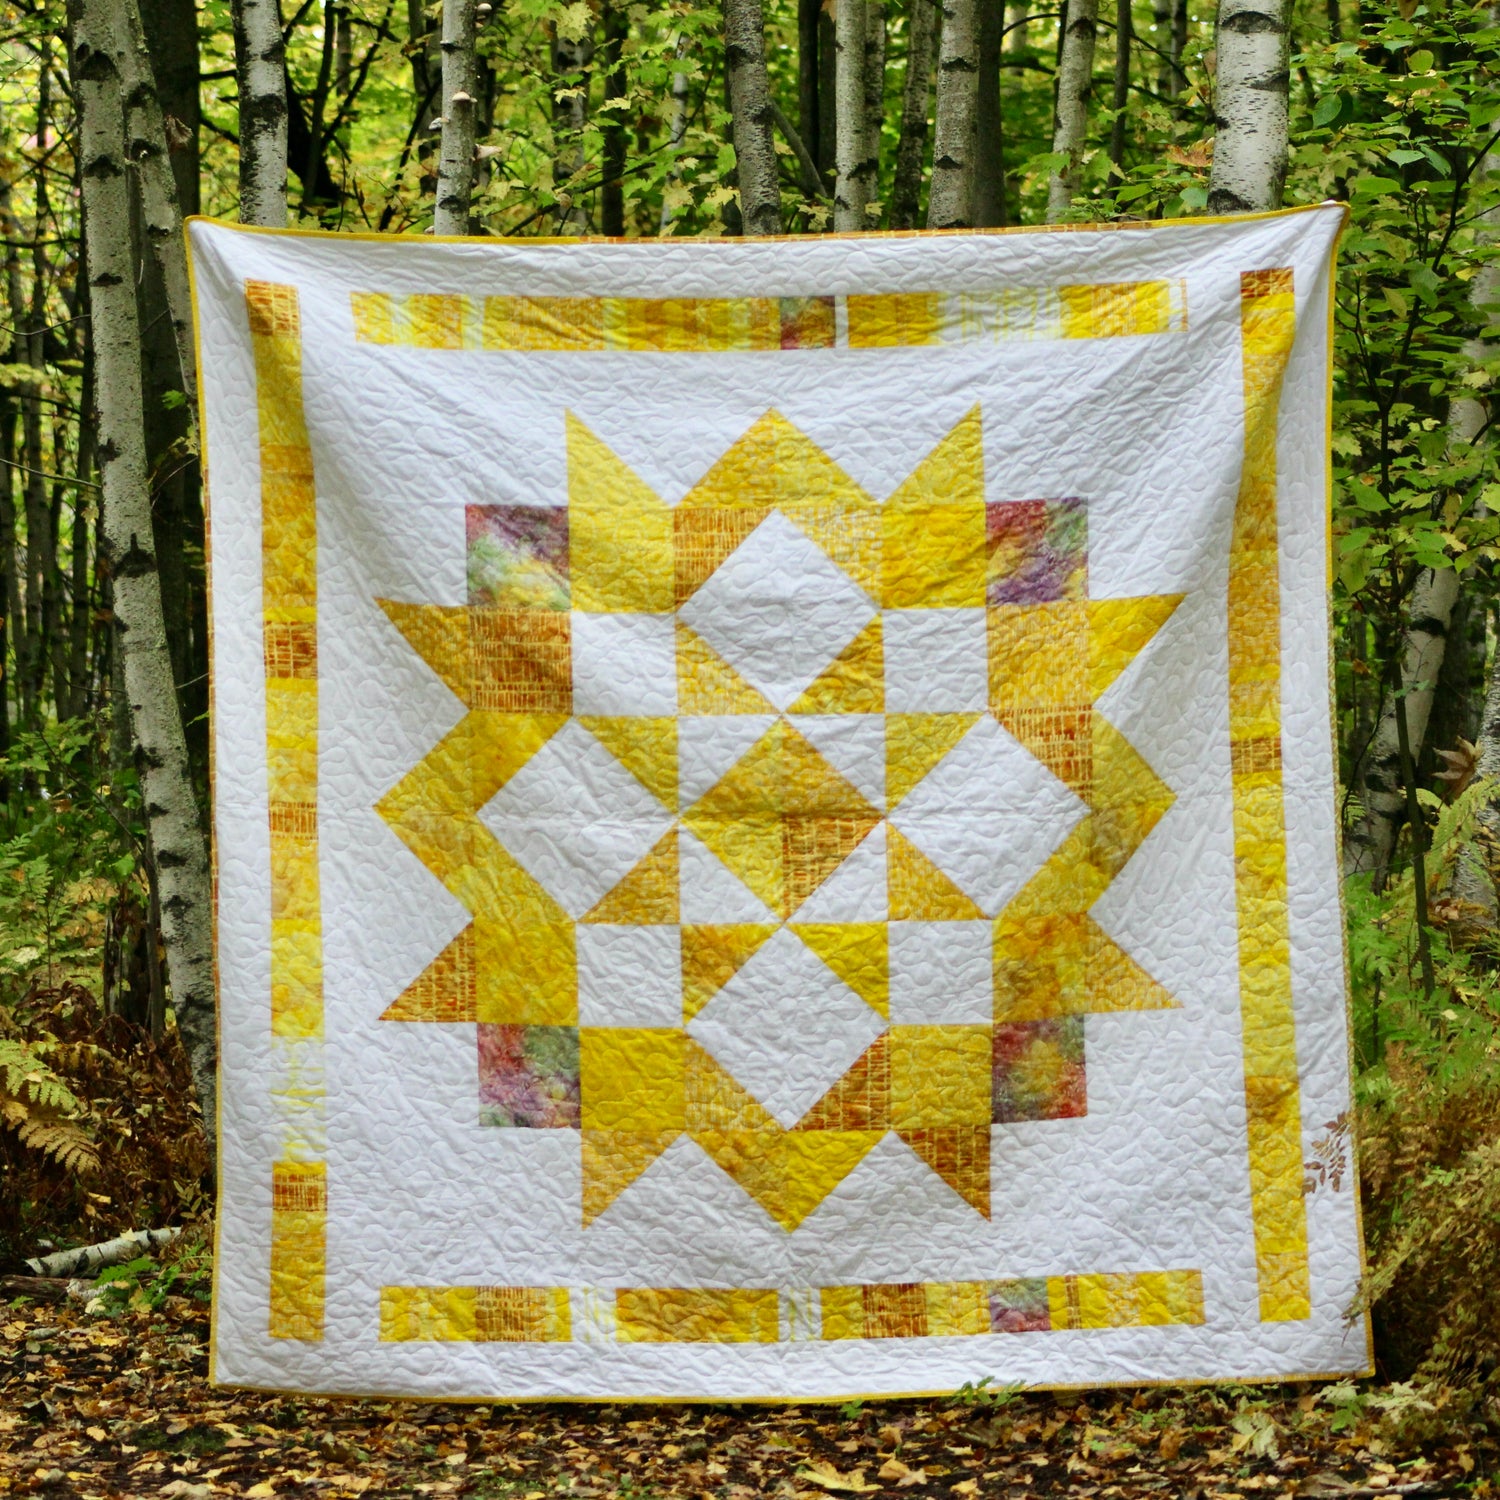 A vibrant quilt made with returned Ground Soap packaging.